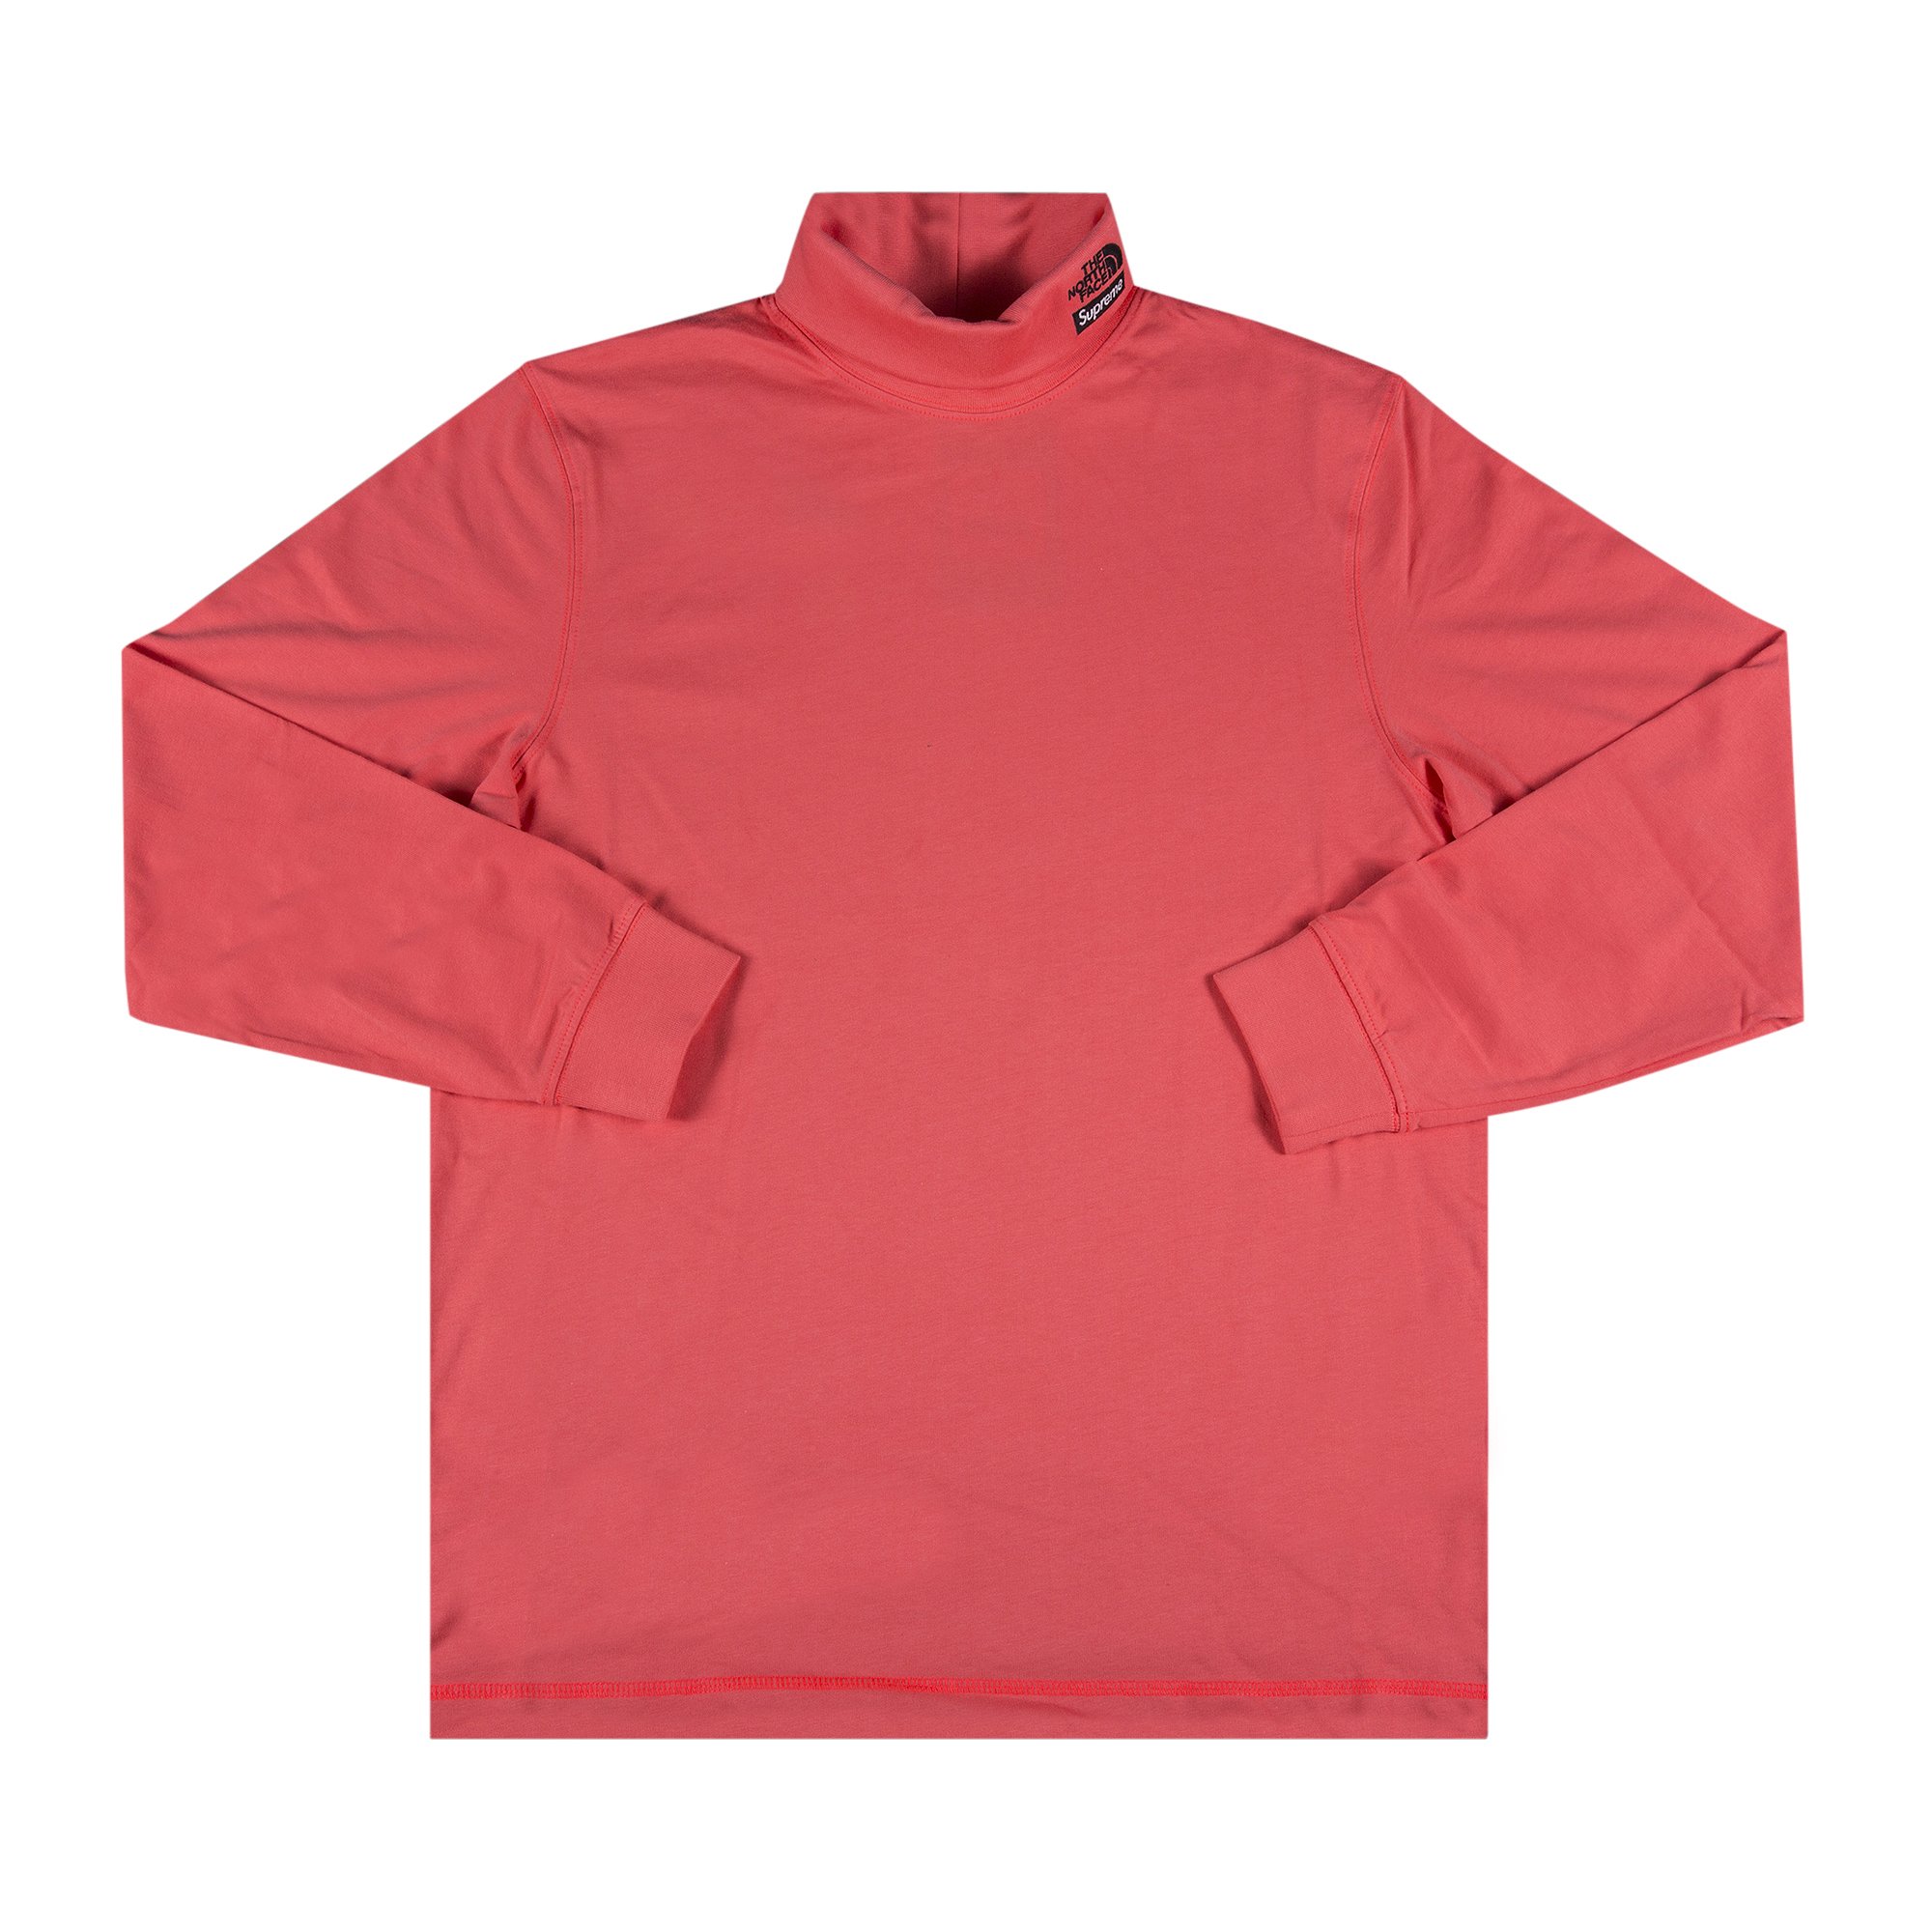 Buy Supreme x The North Face RTG Turtleneck 'Bright Red' - SS20KN102 BRIGHT  RED | GOAT CA